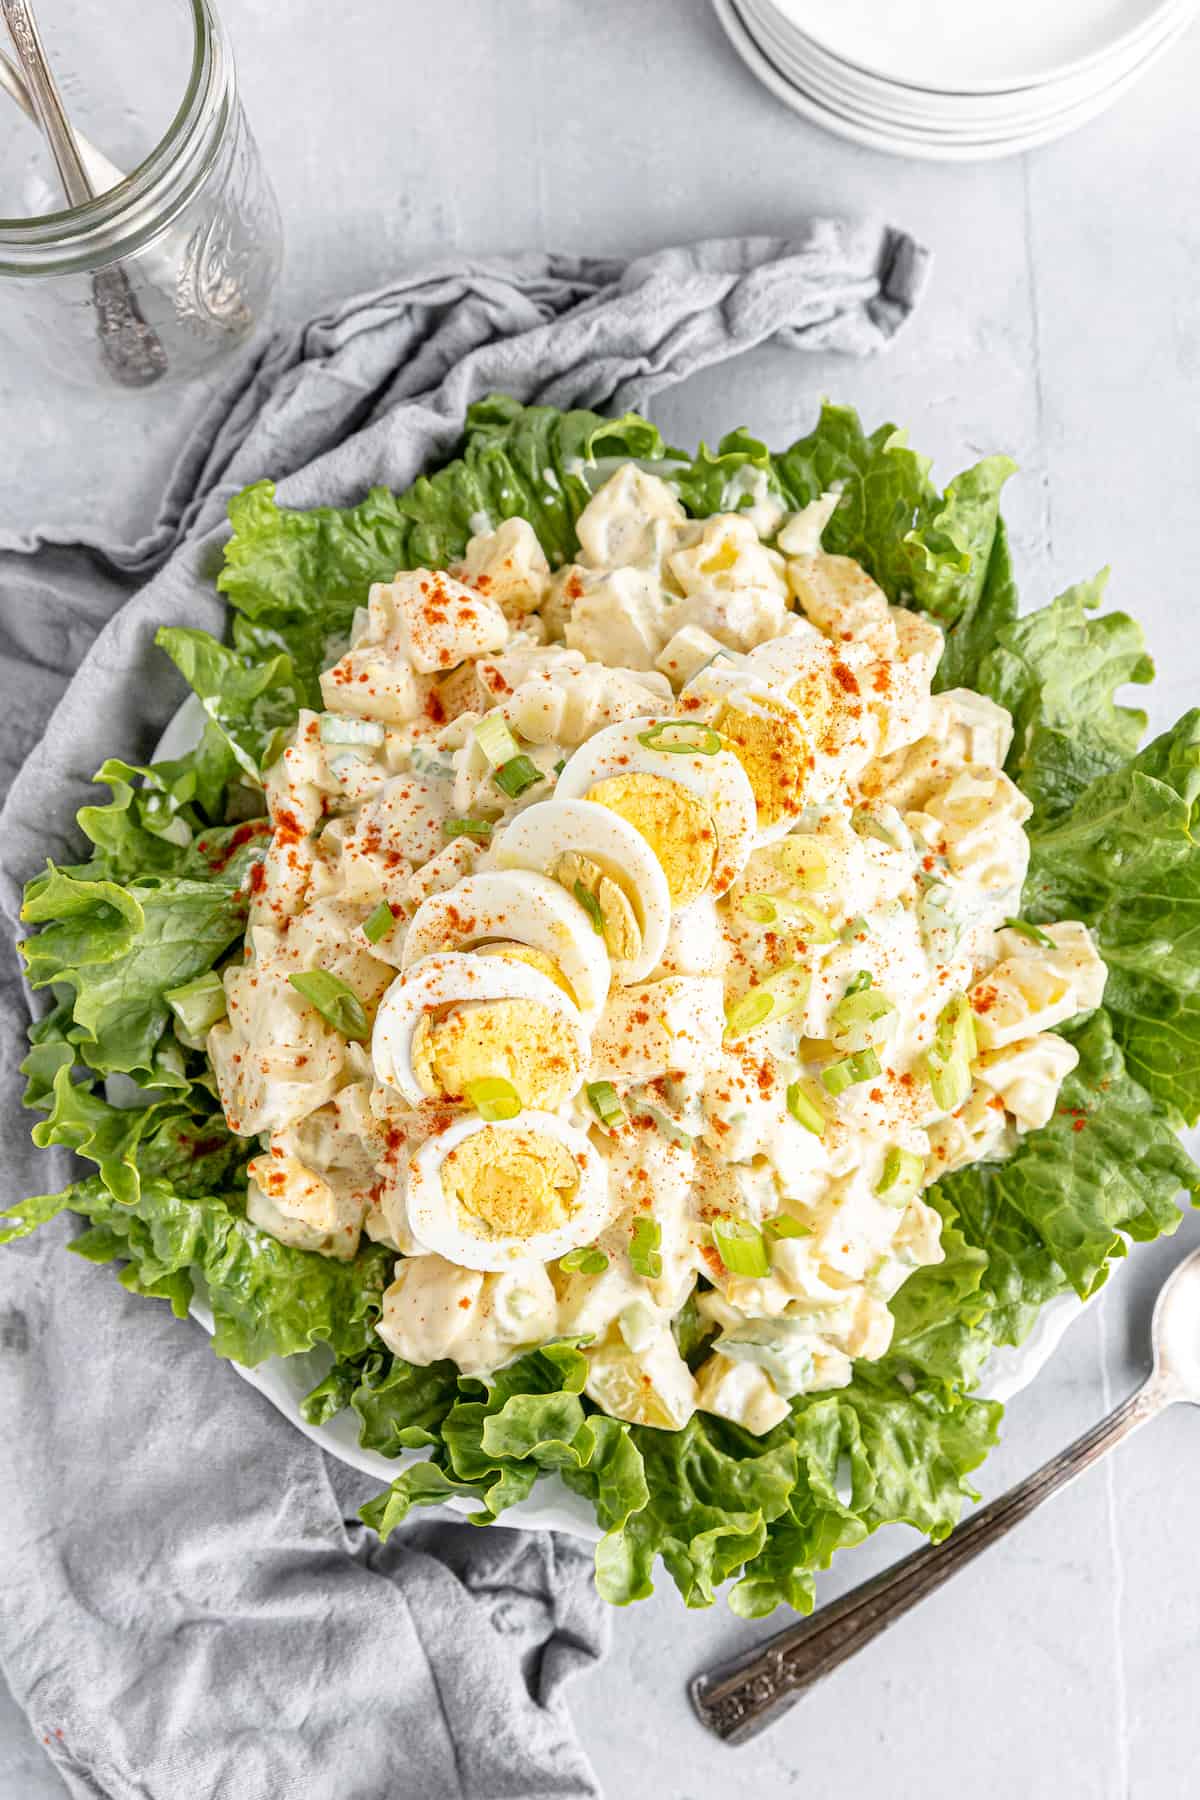 An Overhead Shot of a Potato Salad on a Lettuce-Lined Plate Beside a Gray Kitchen Towel